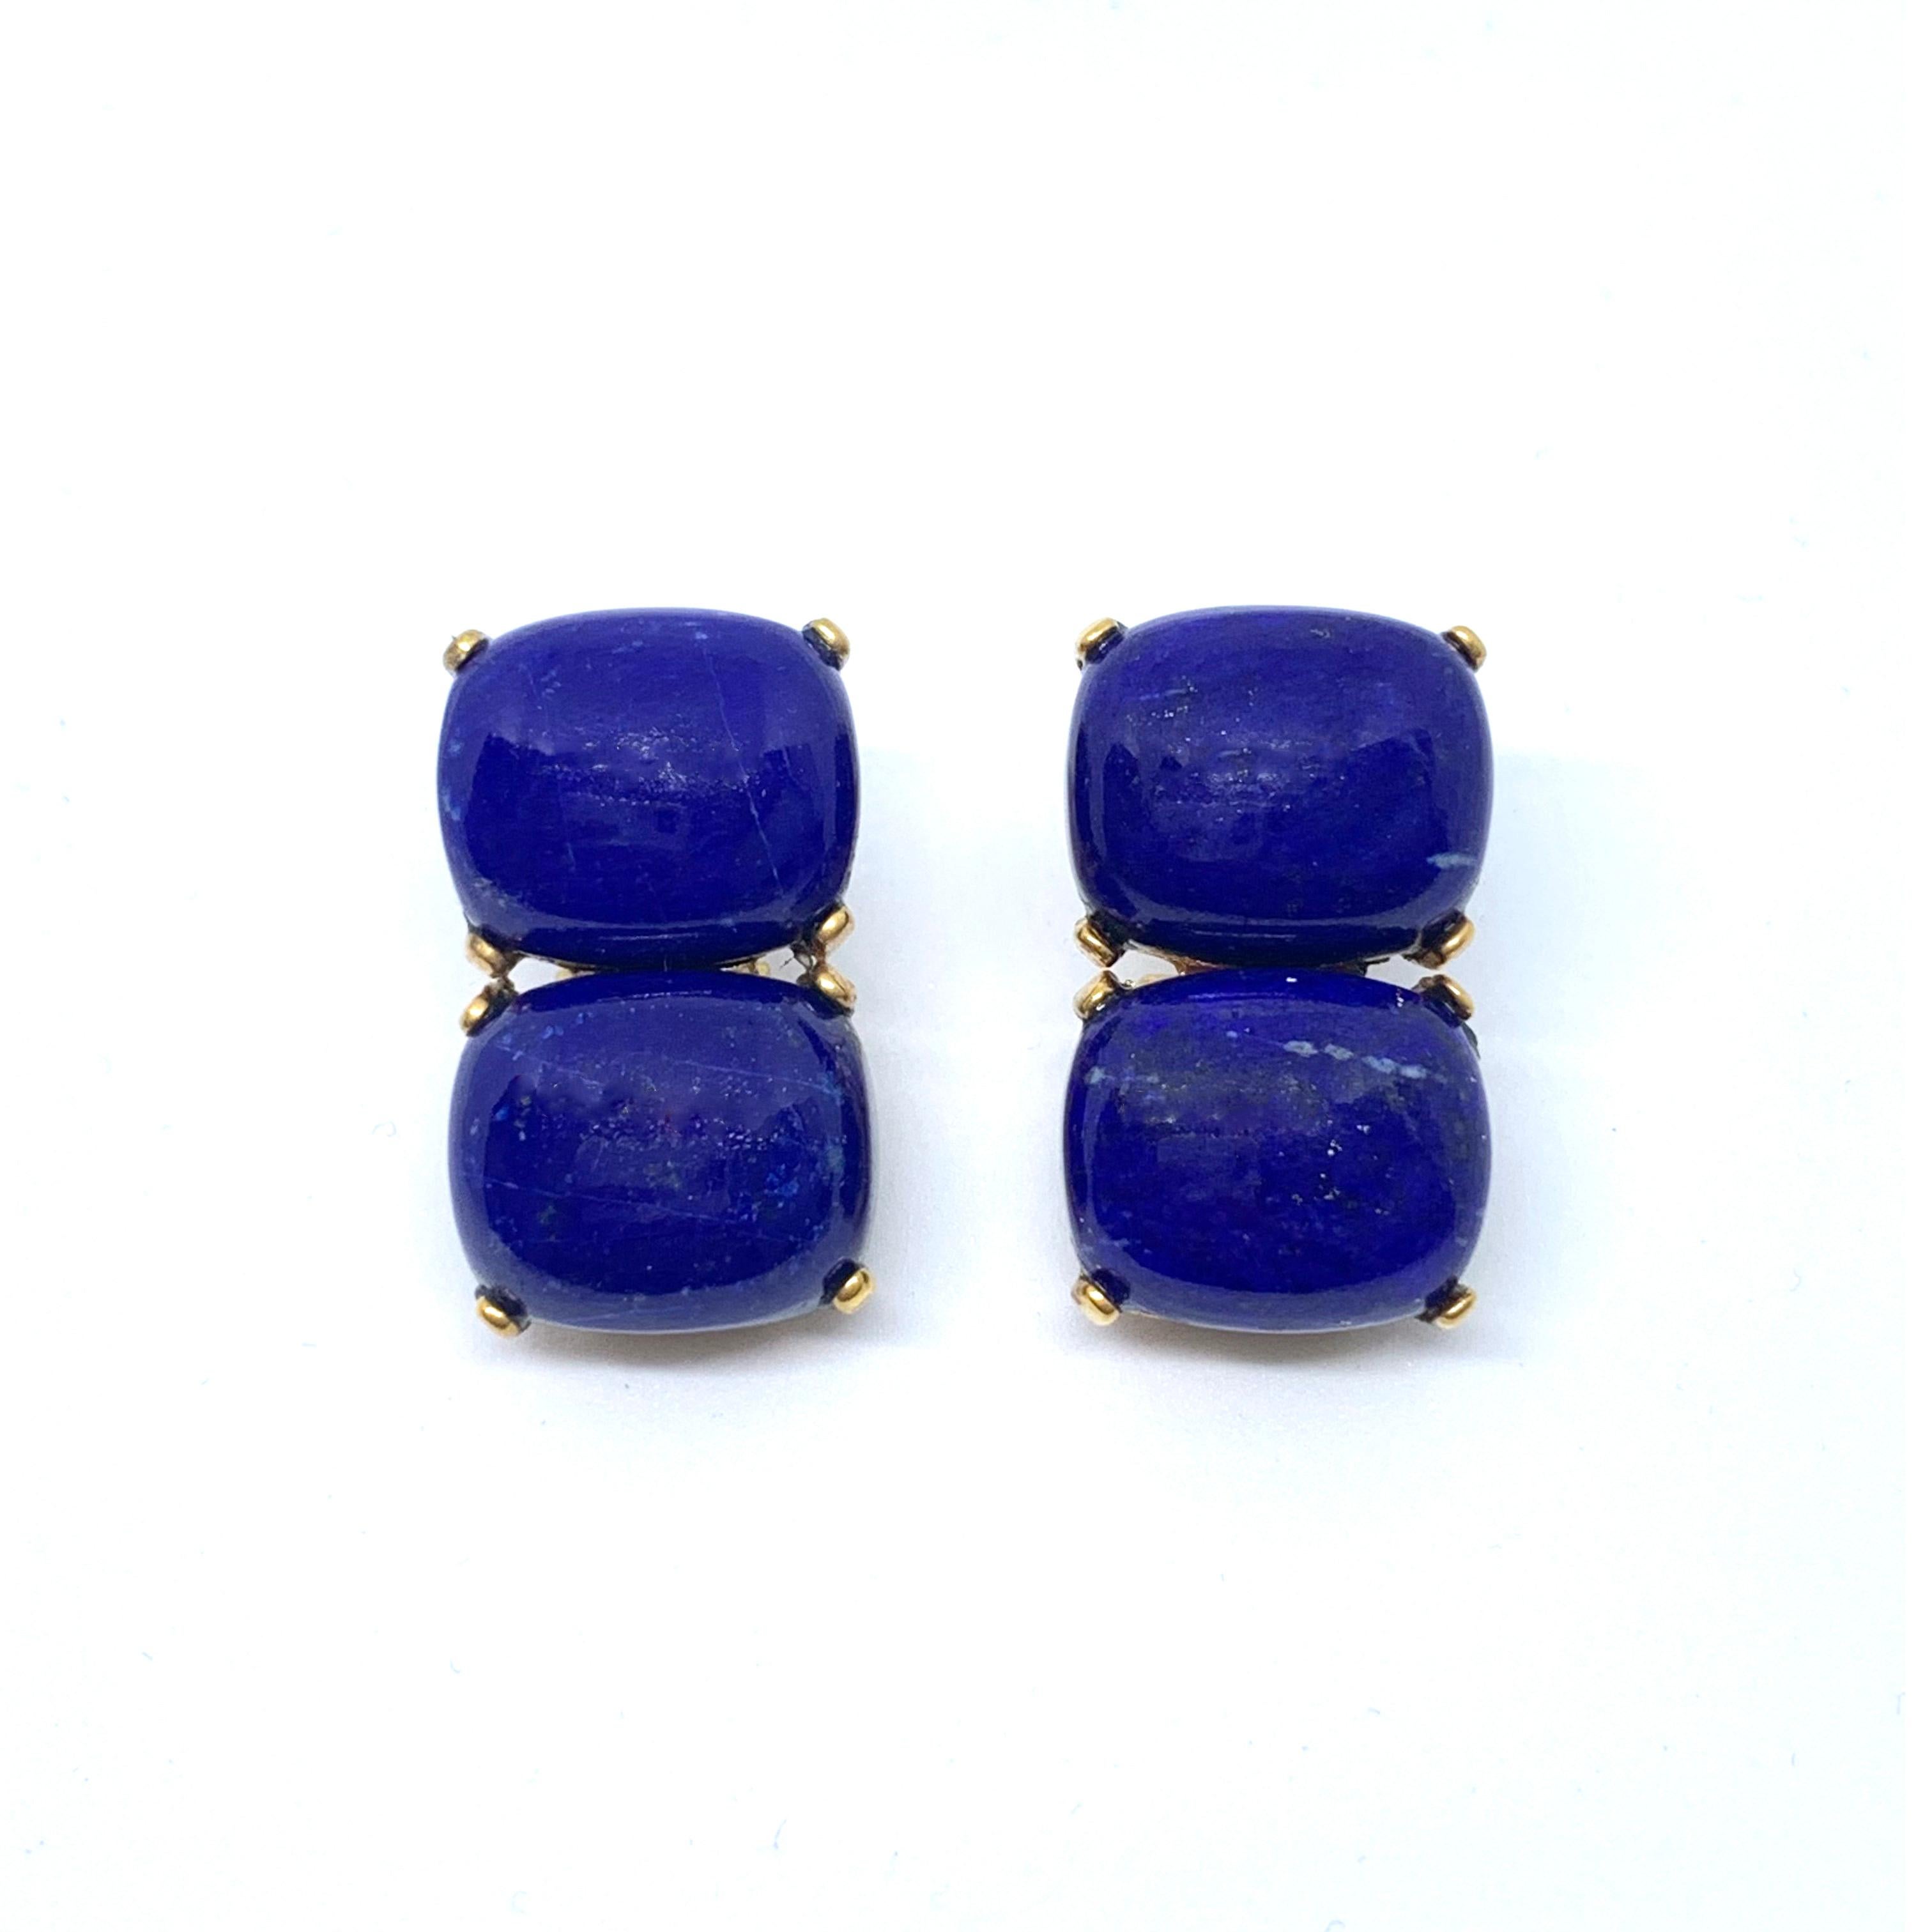 These stunning pair of earrings features 4 pieces of large cushion-shape cabochon-cut genuine lapis lazuli, hand bezel-set in 18k yellow gold vermeil over sterling silver. The classic double design allows the earrings to show off the beautiful and